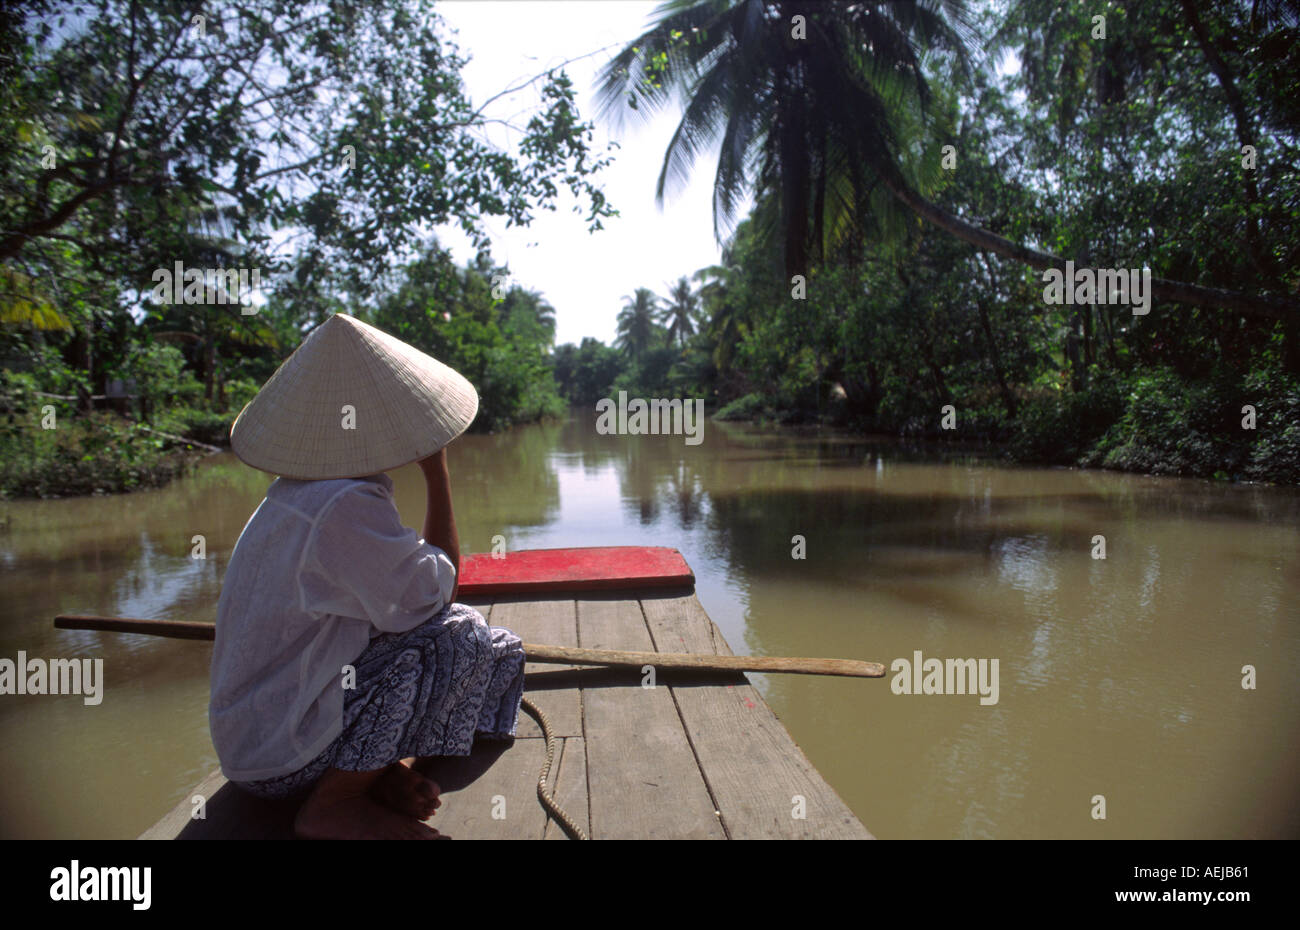 Woman wearing traditional straw hat in boat Mekong Delta Vietnam Stock Photo